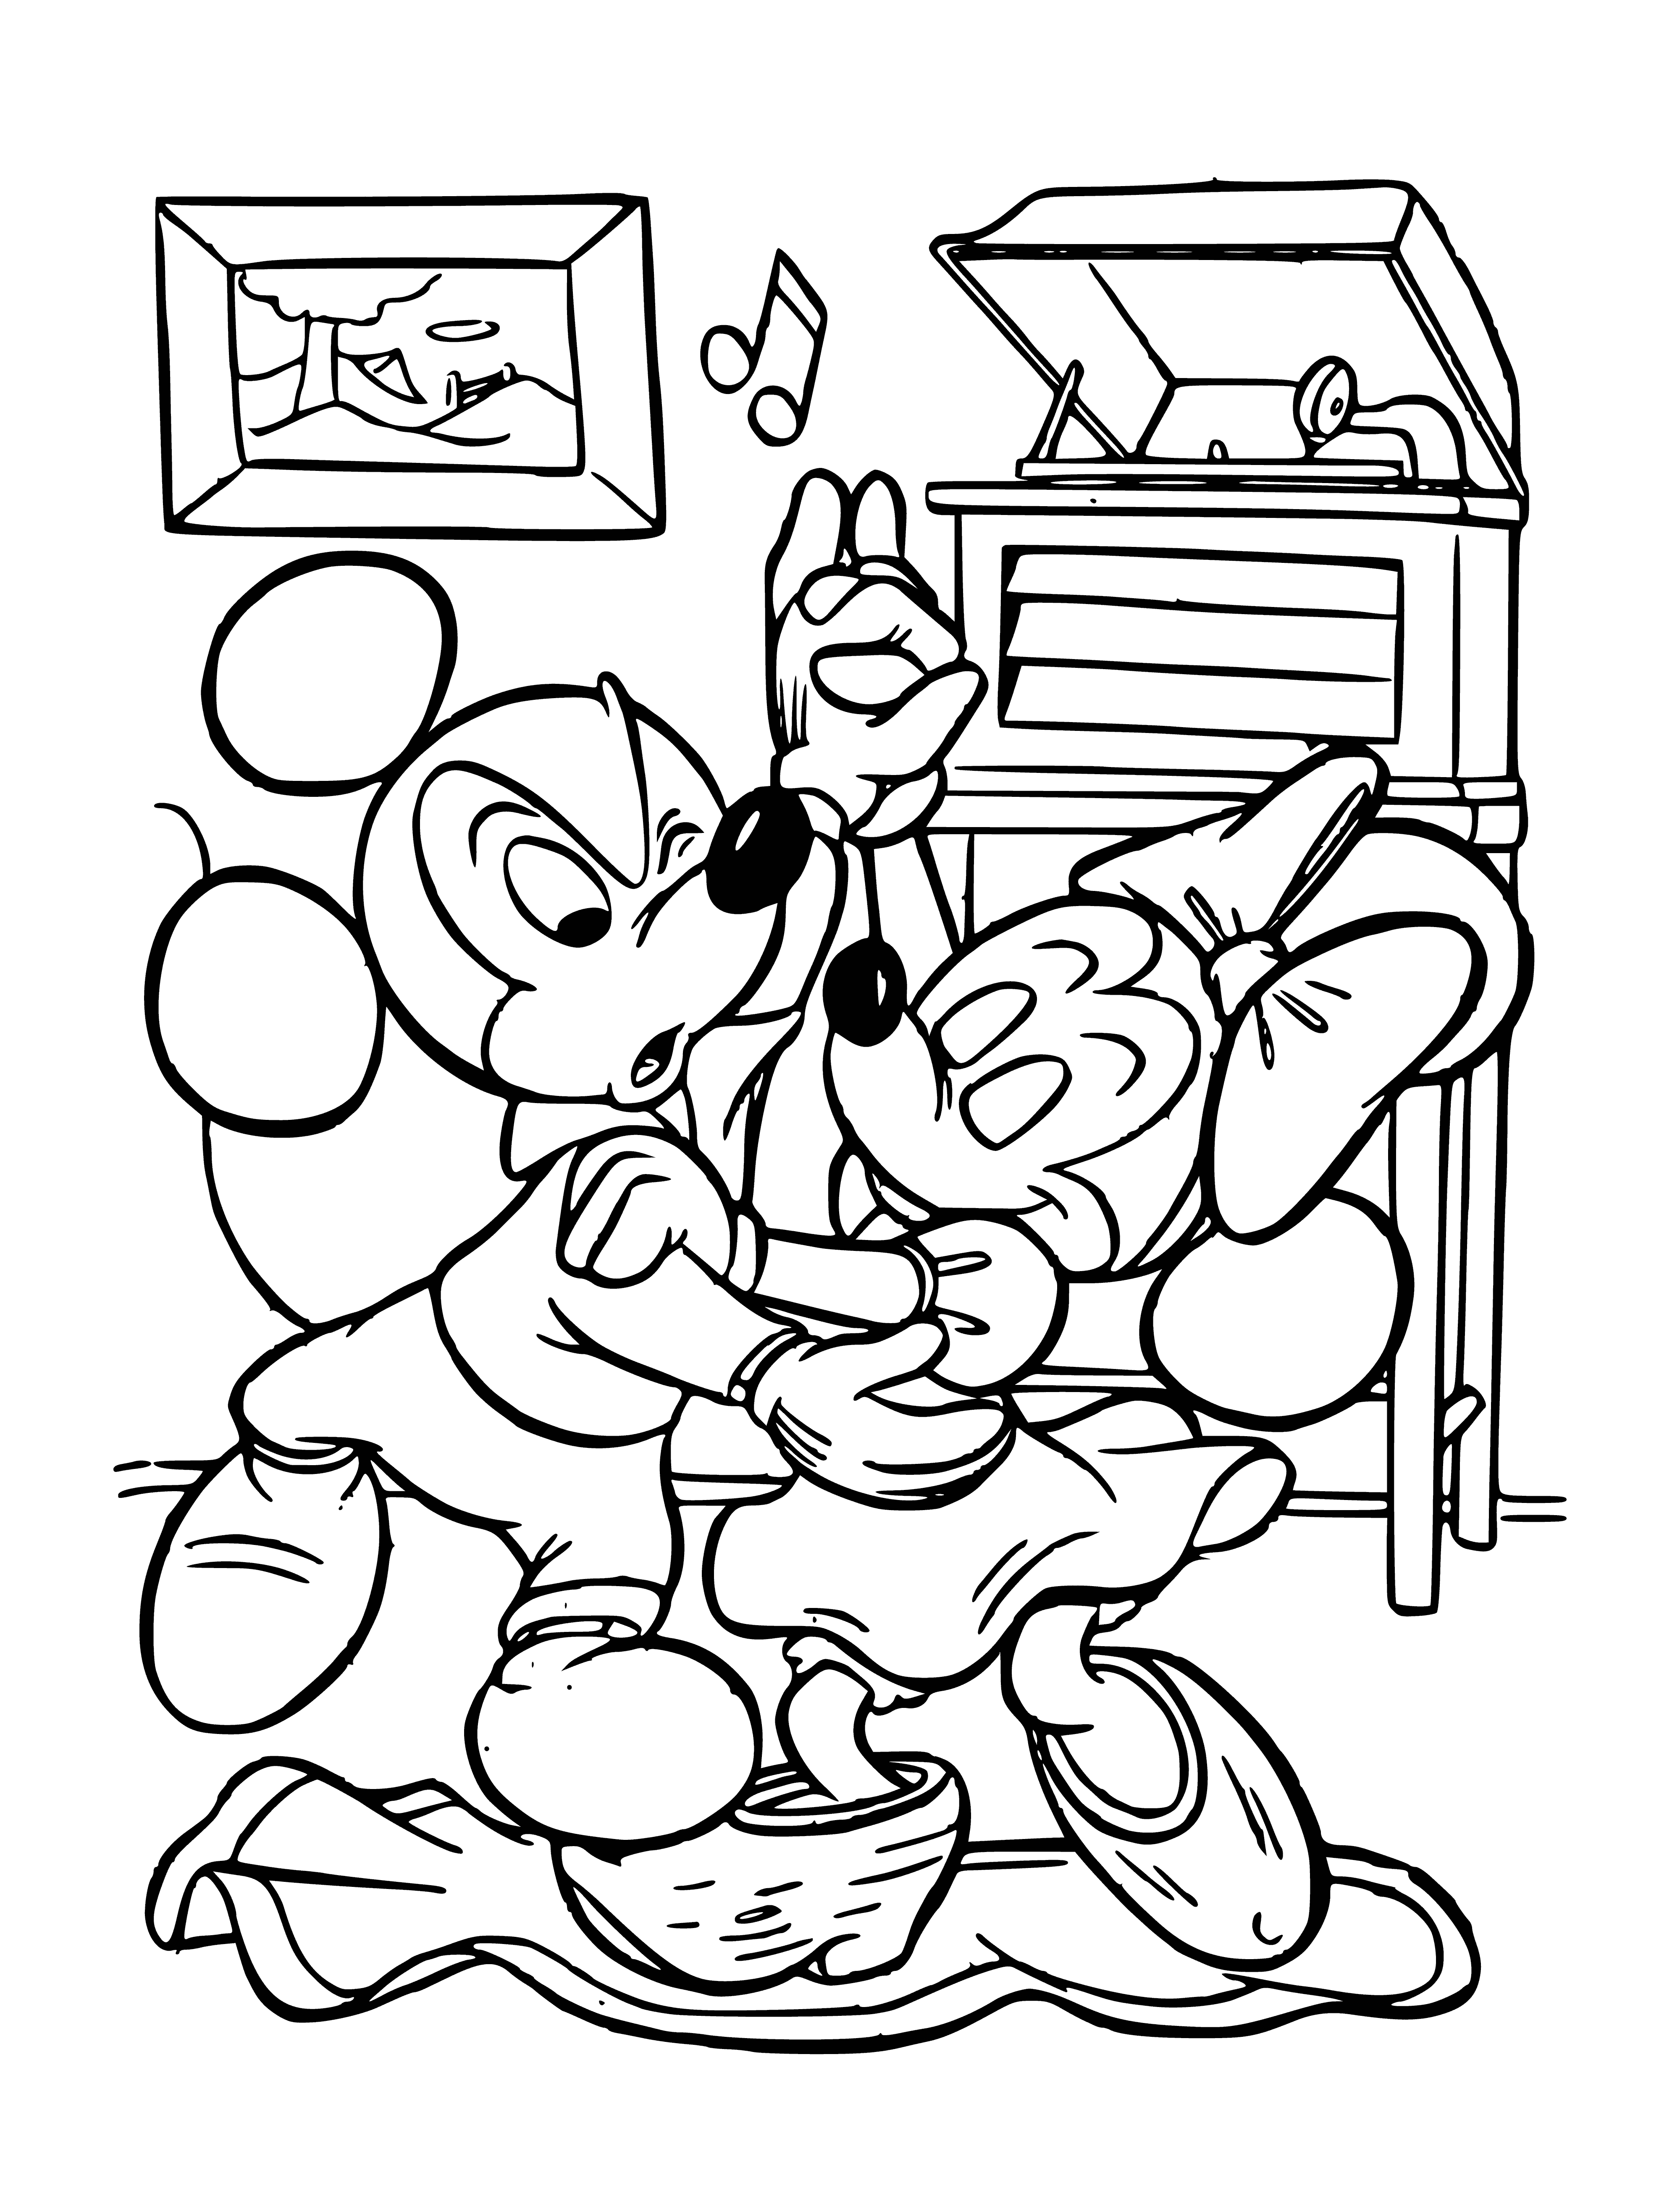 coloring page: 3 Mickey's row: hat tipping, clapping & joyous dancing w/smiles - celebrating being together.